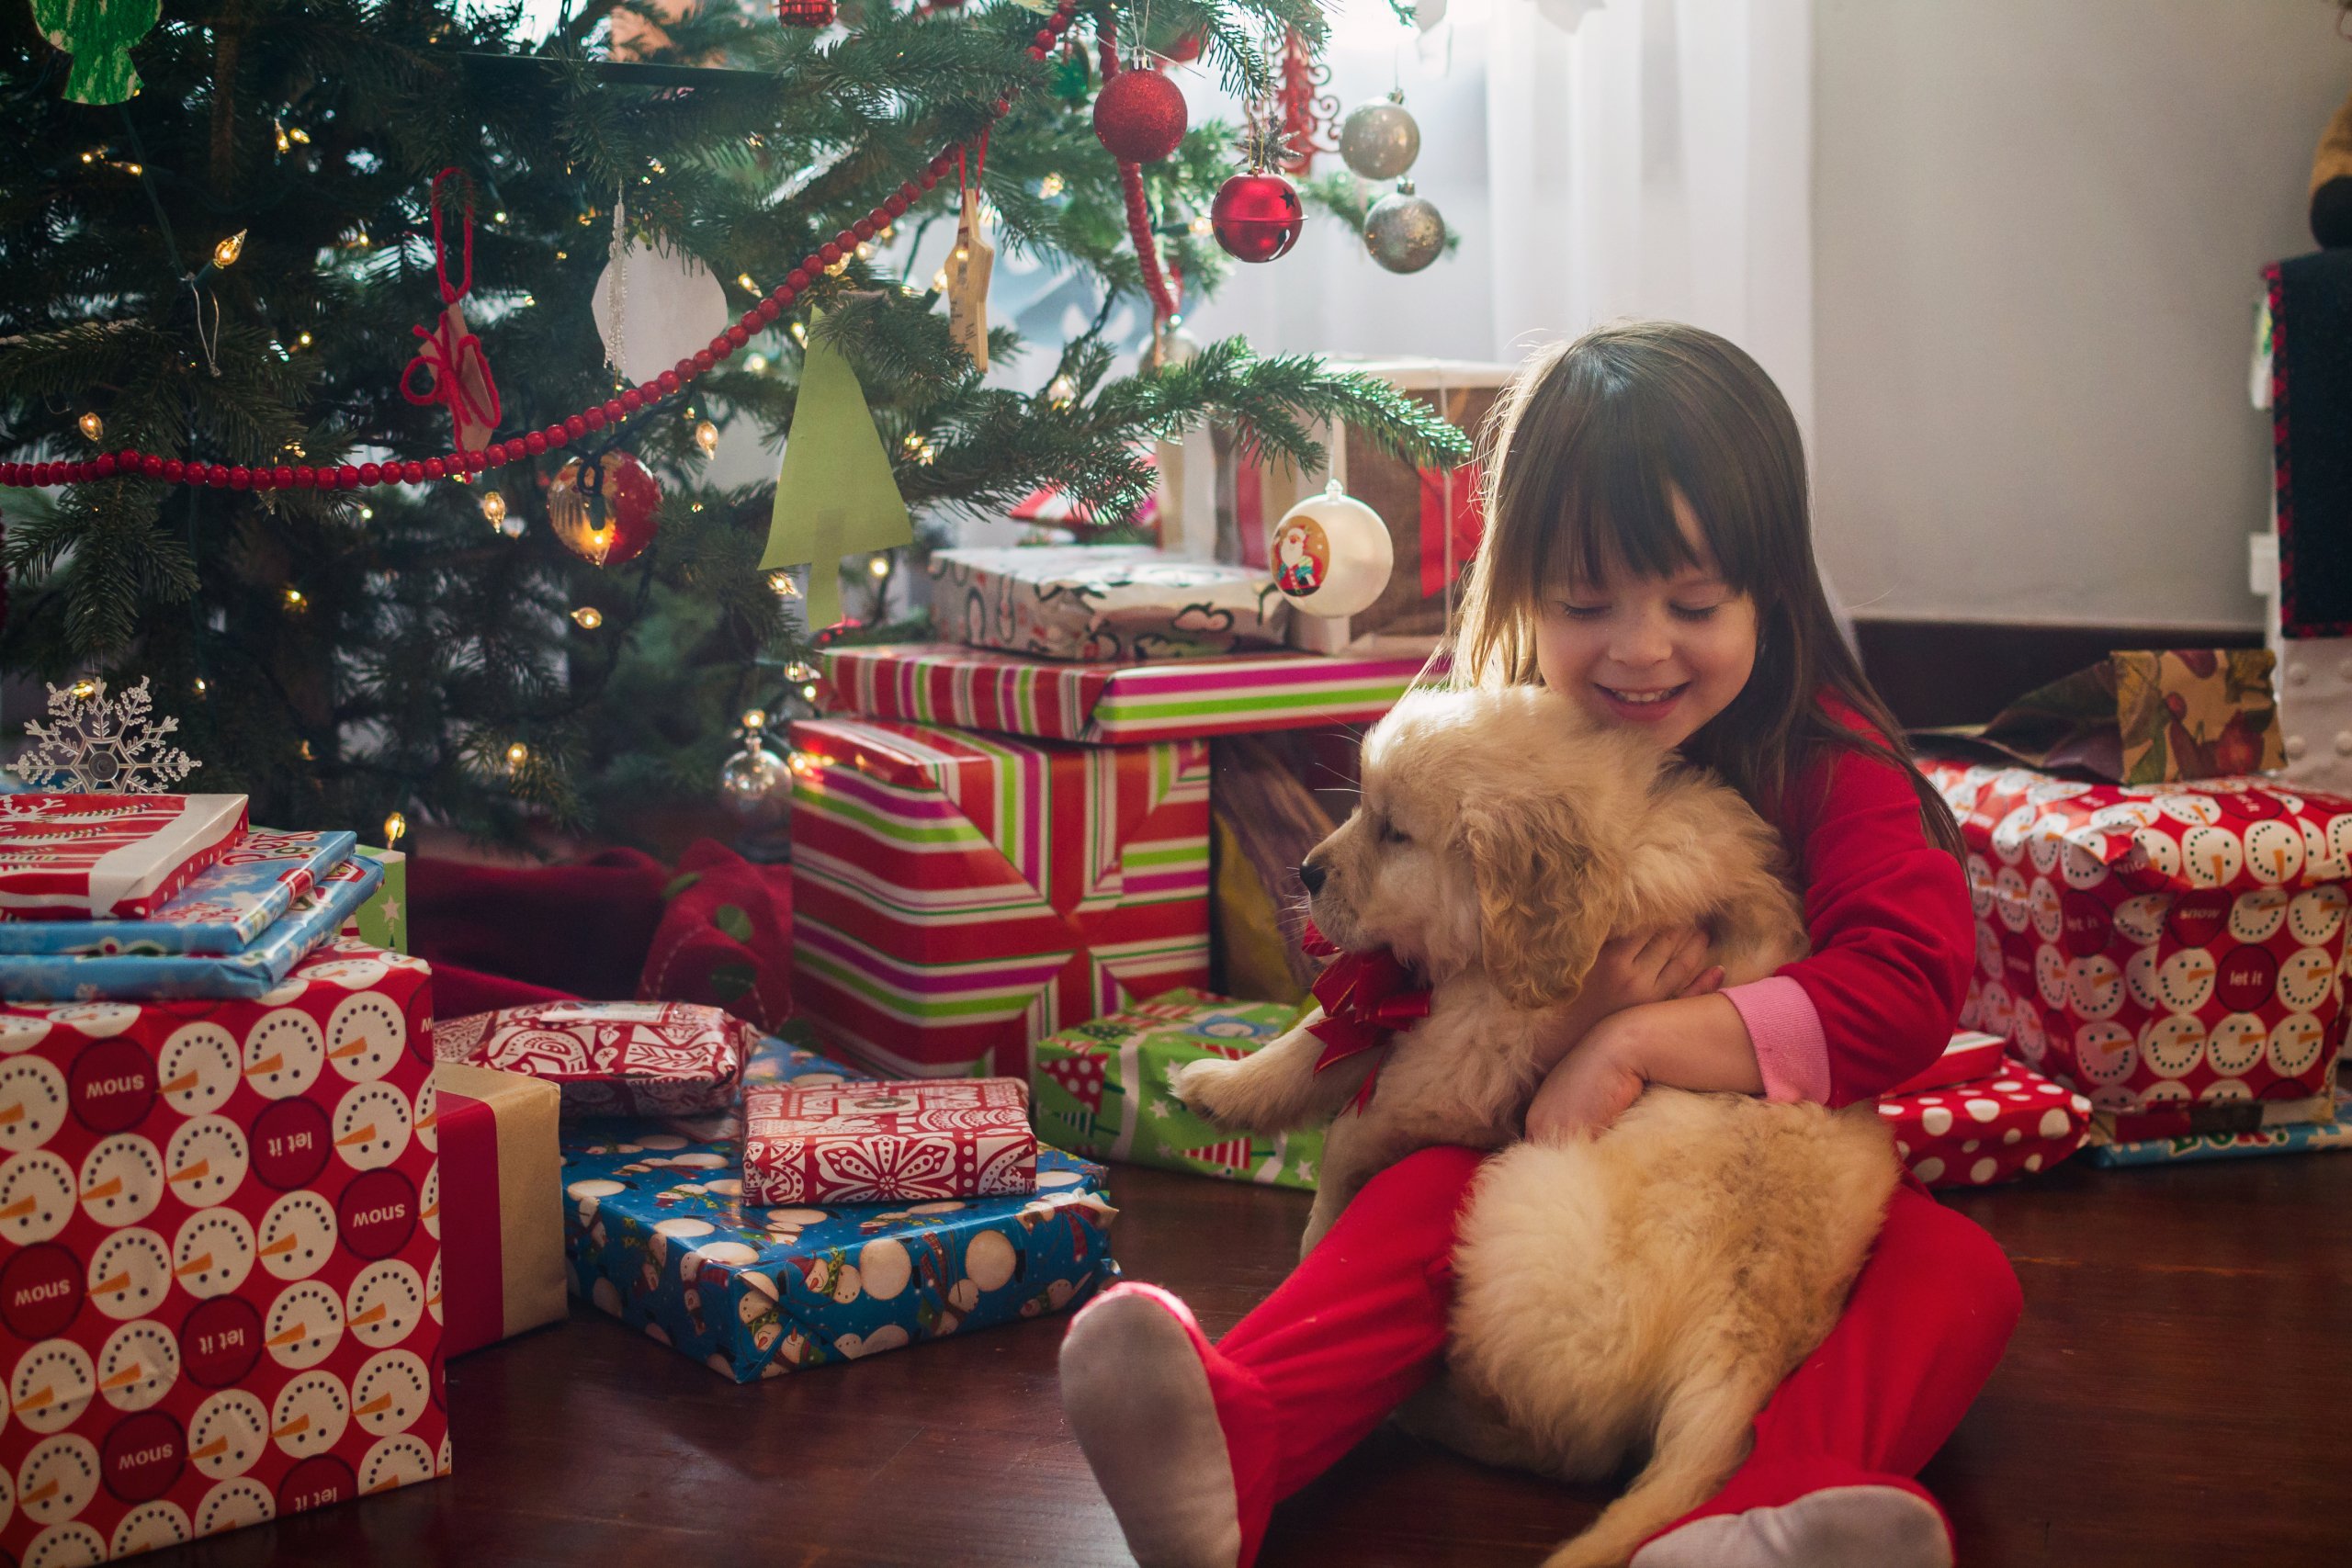 Little girl with puppy in front of Christmas tree.